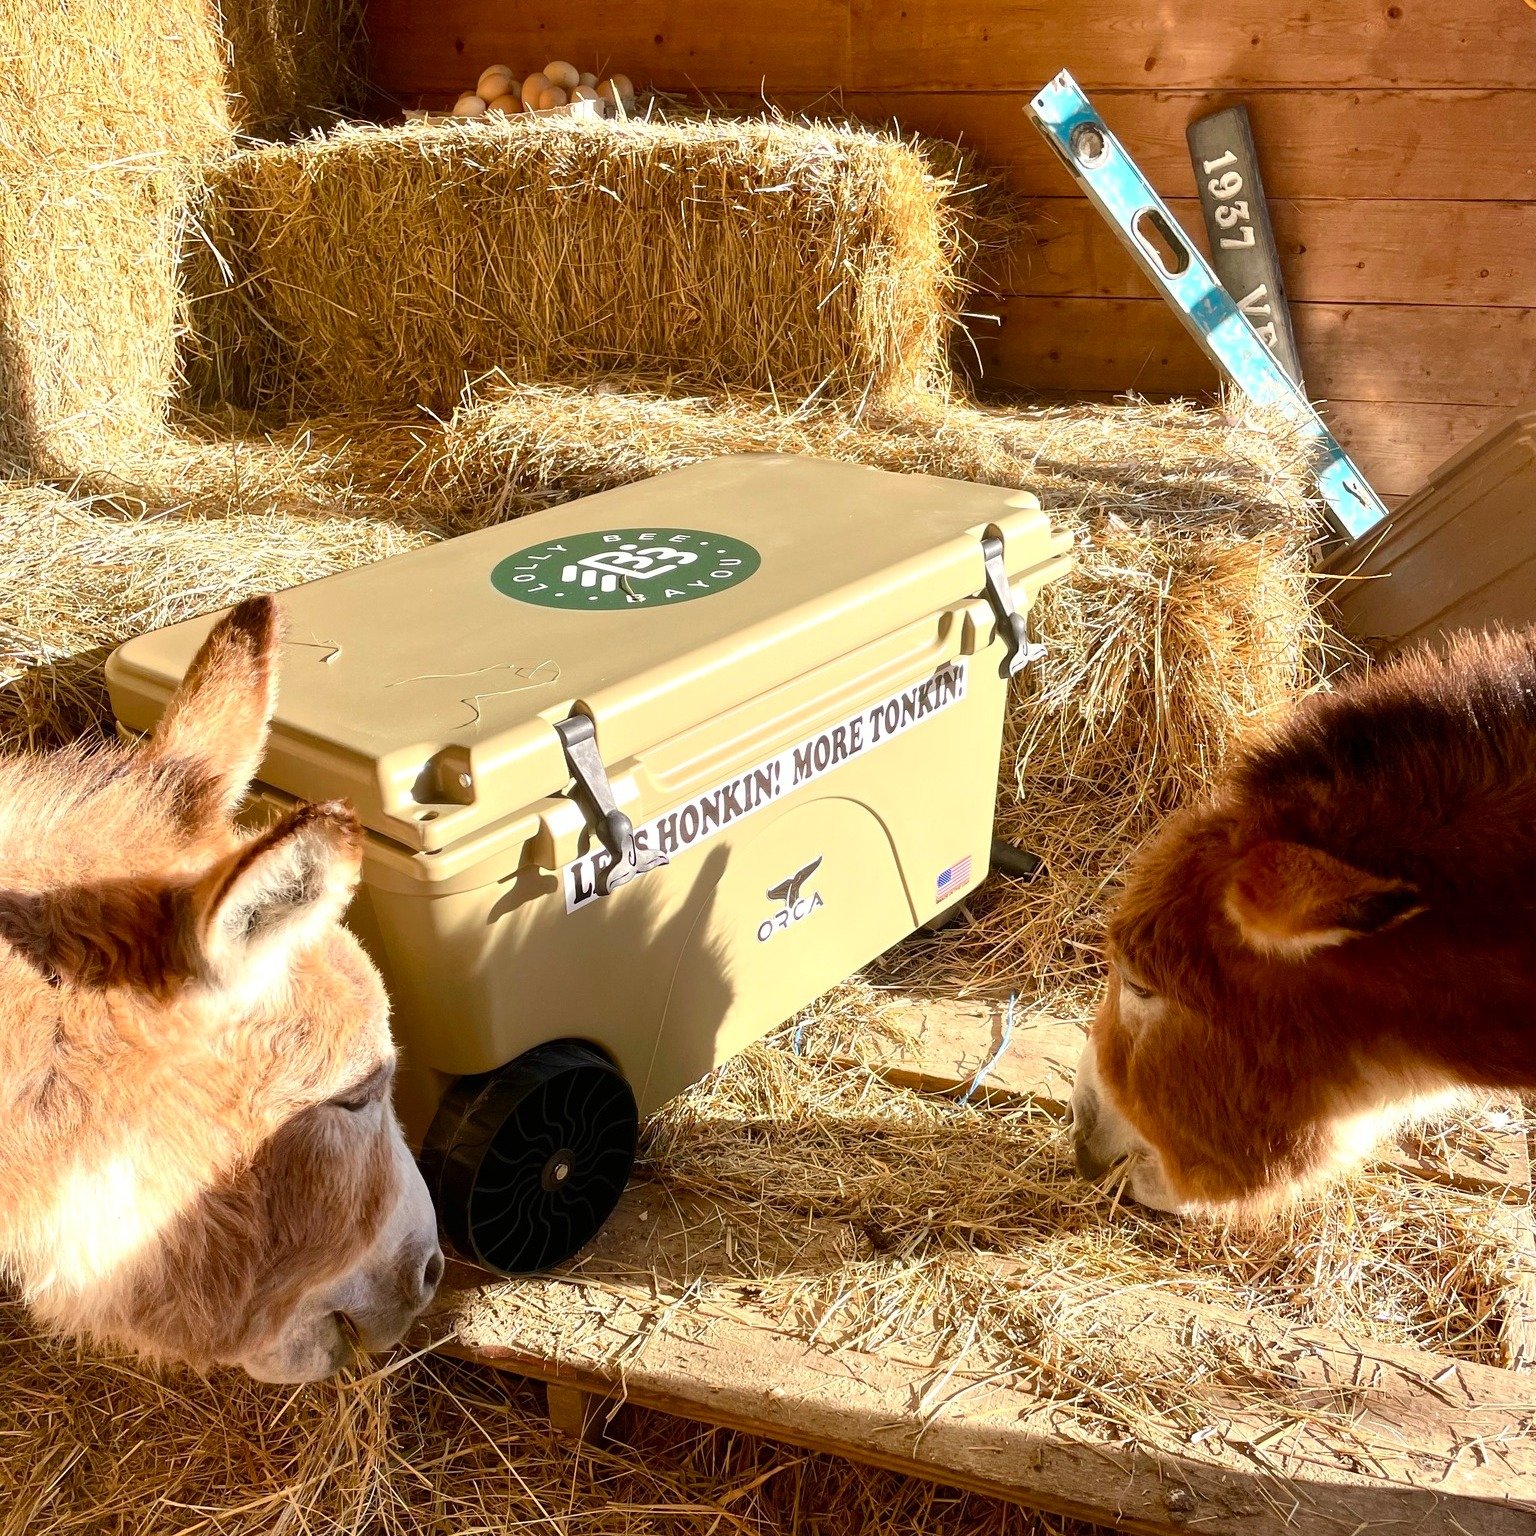 Cheers to Orca Coolers for this cool cutie so the human can join in on the barn buffet! With their sturdy Southern roots and commitment to outdoor fun, they&rsquo;ll keep our barnyard beverages icy and our spirits high &lsquo;til the cows come home a